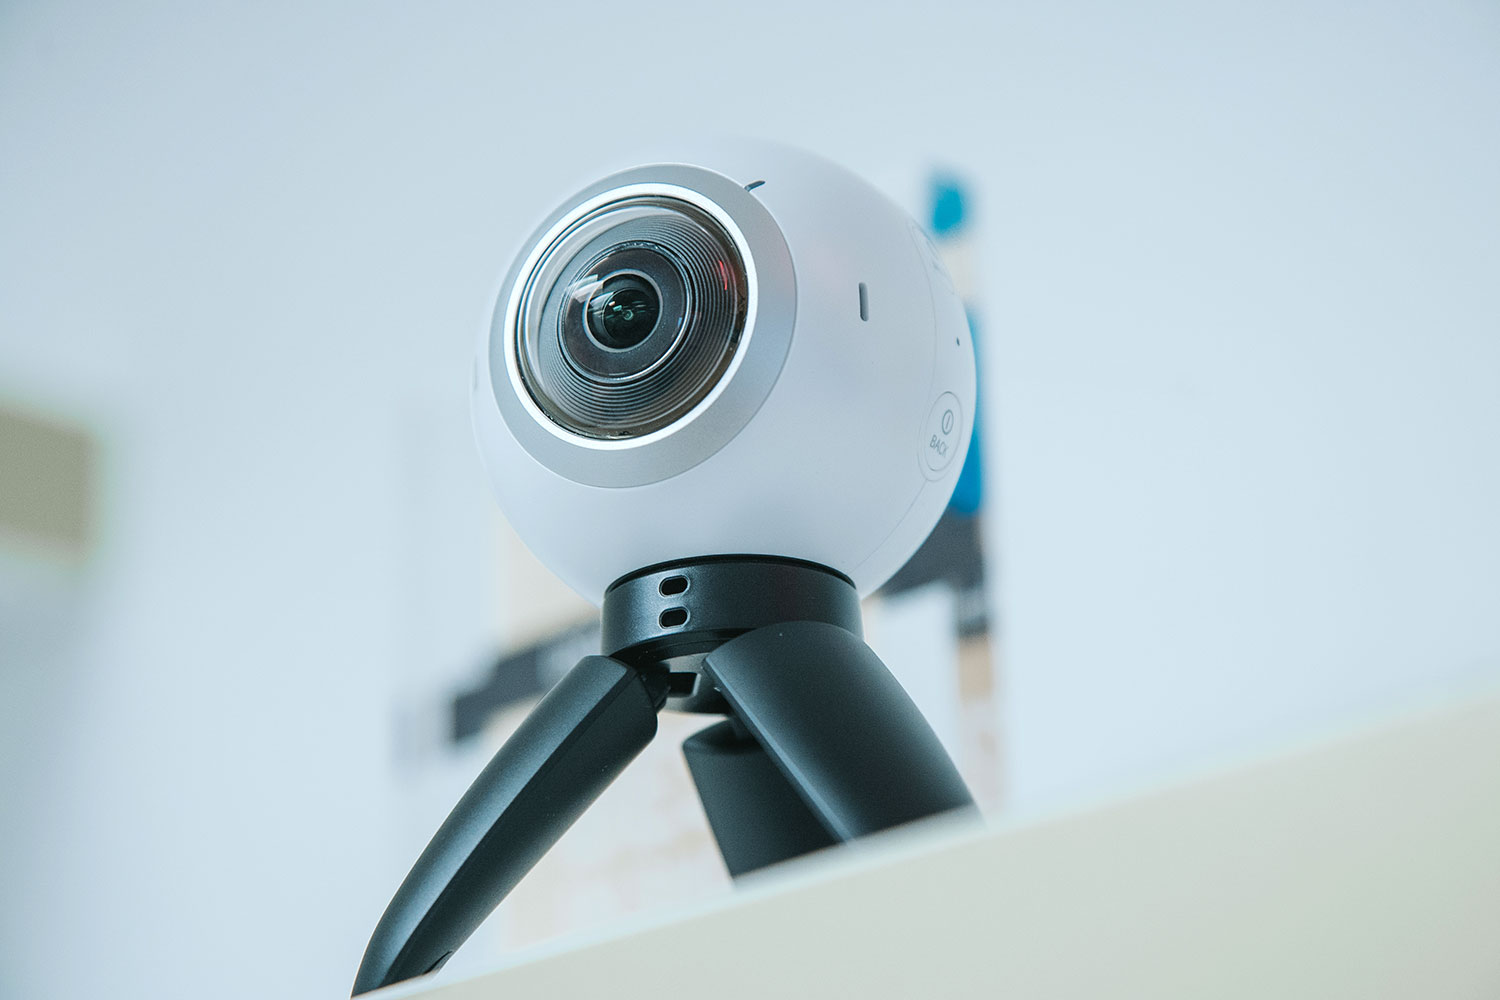 About the Samsung Gear 360 camera, My360